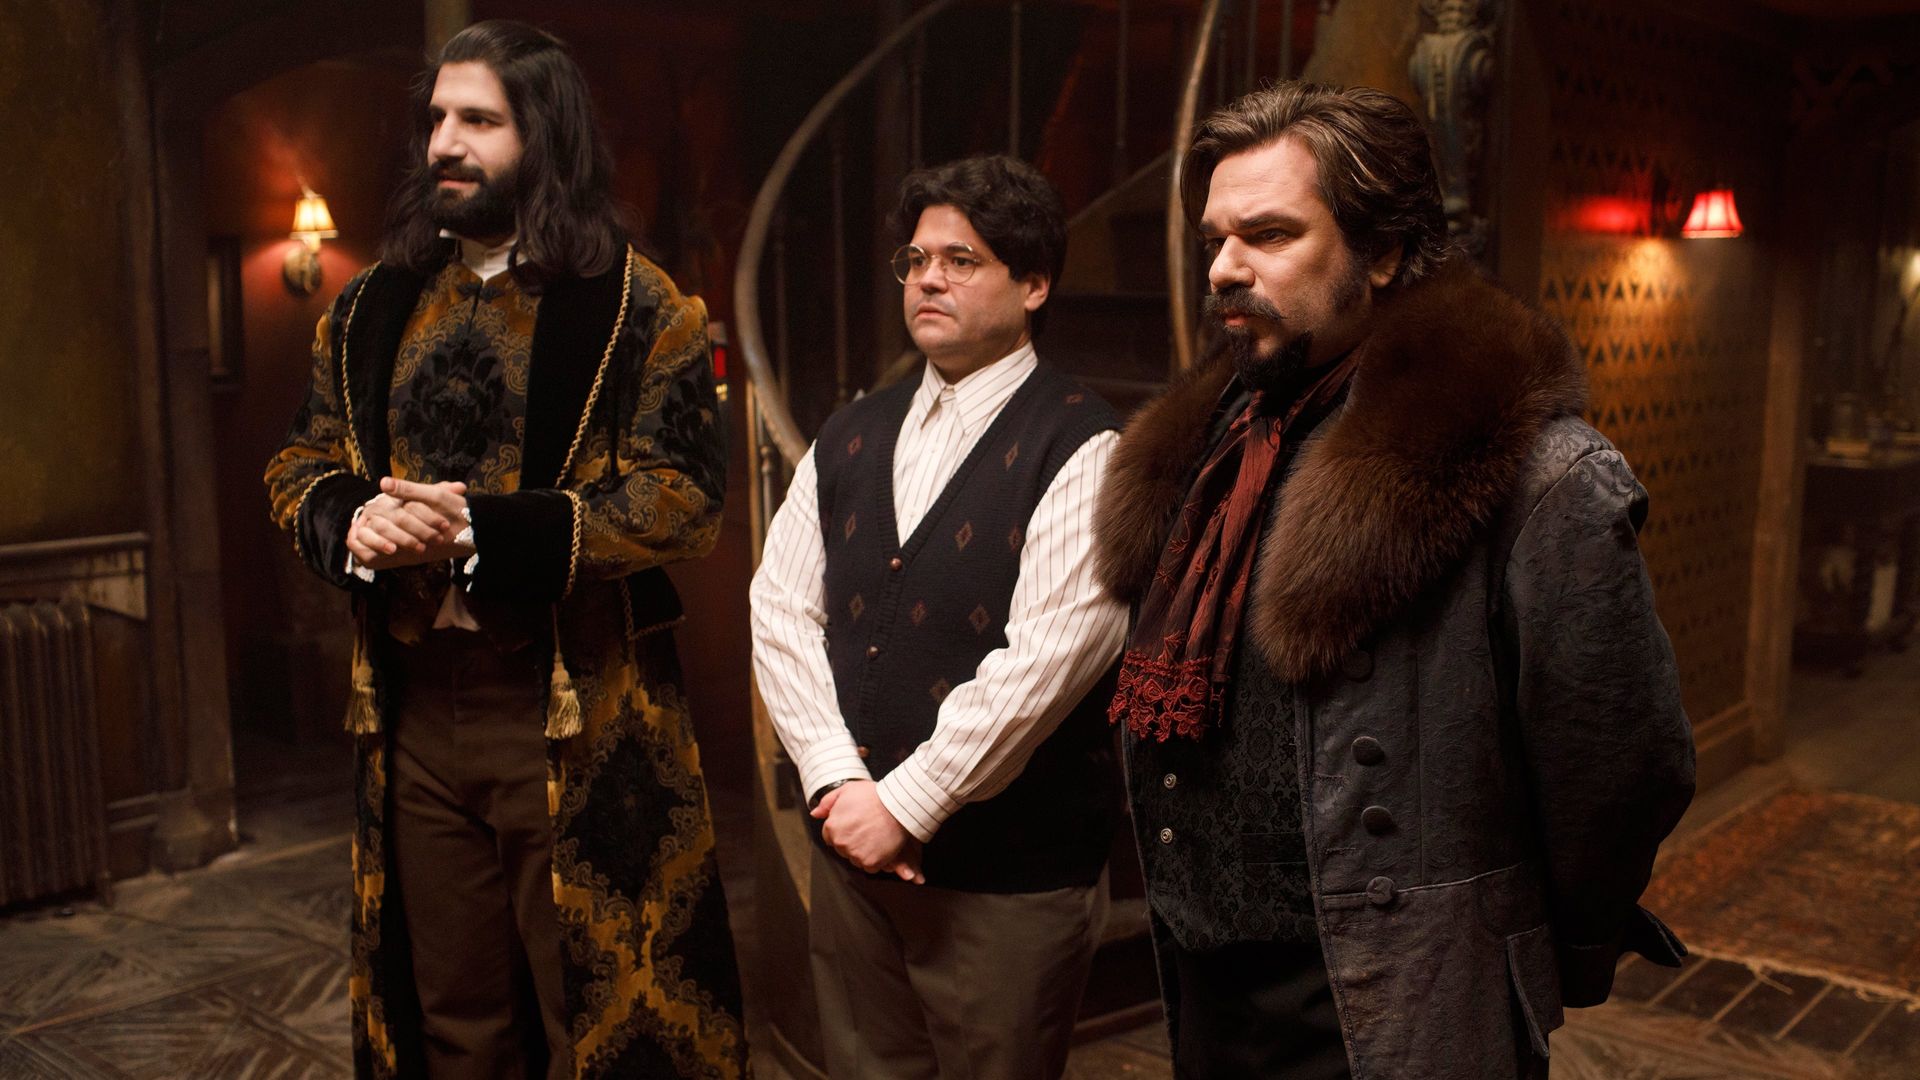 What We Do in the Shadows background